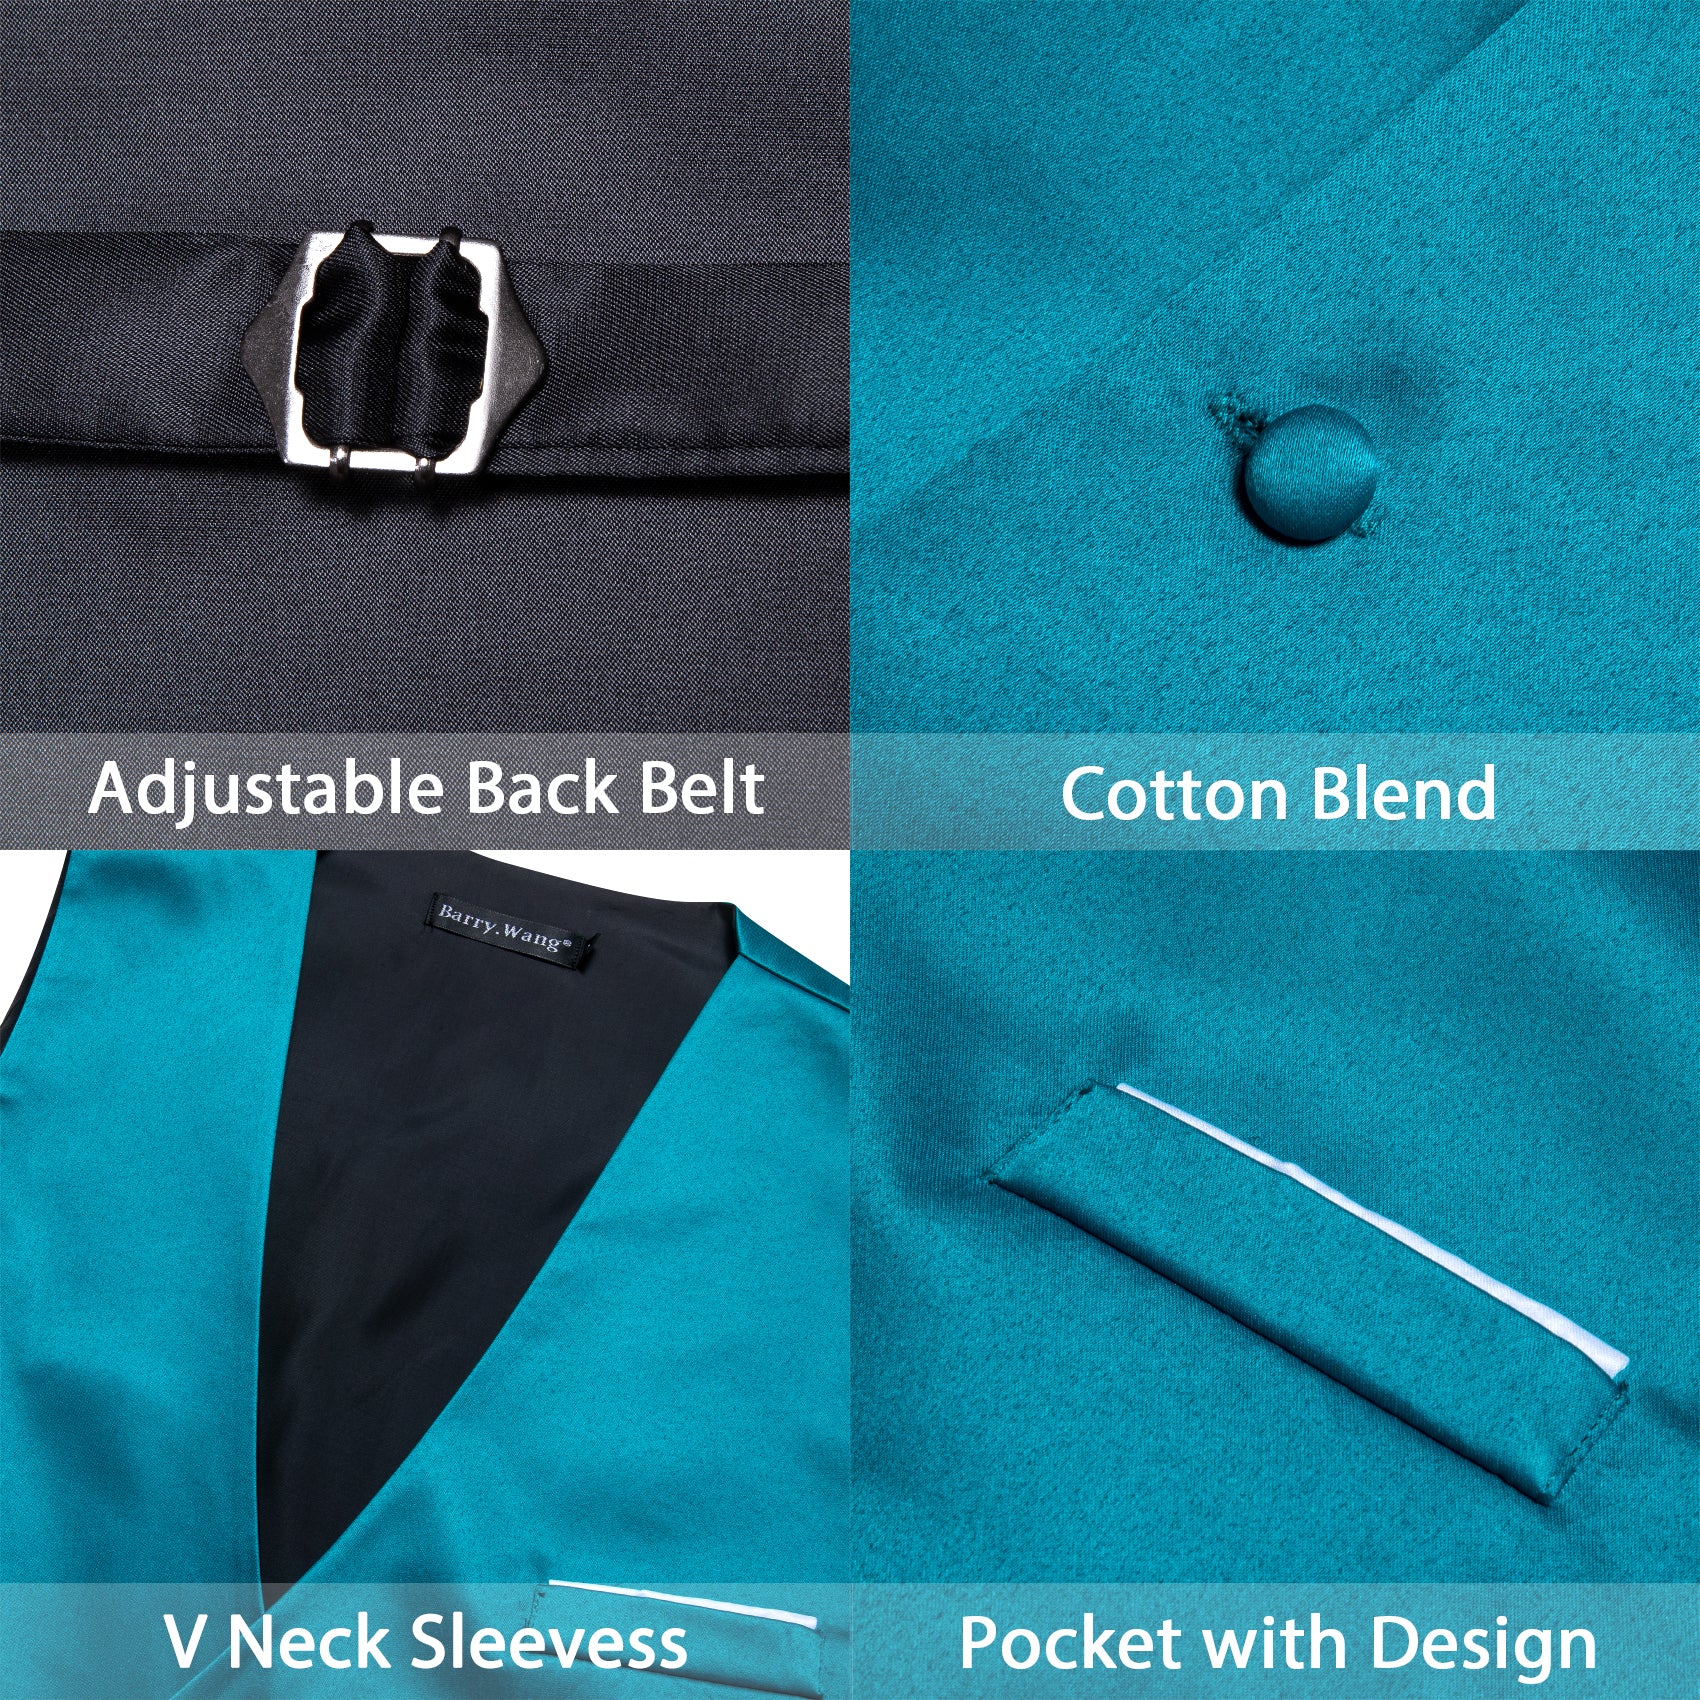 Teal Blue Solid Silk Waistcoat Vest for Business